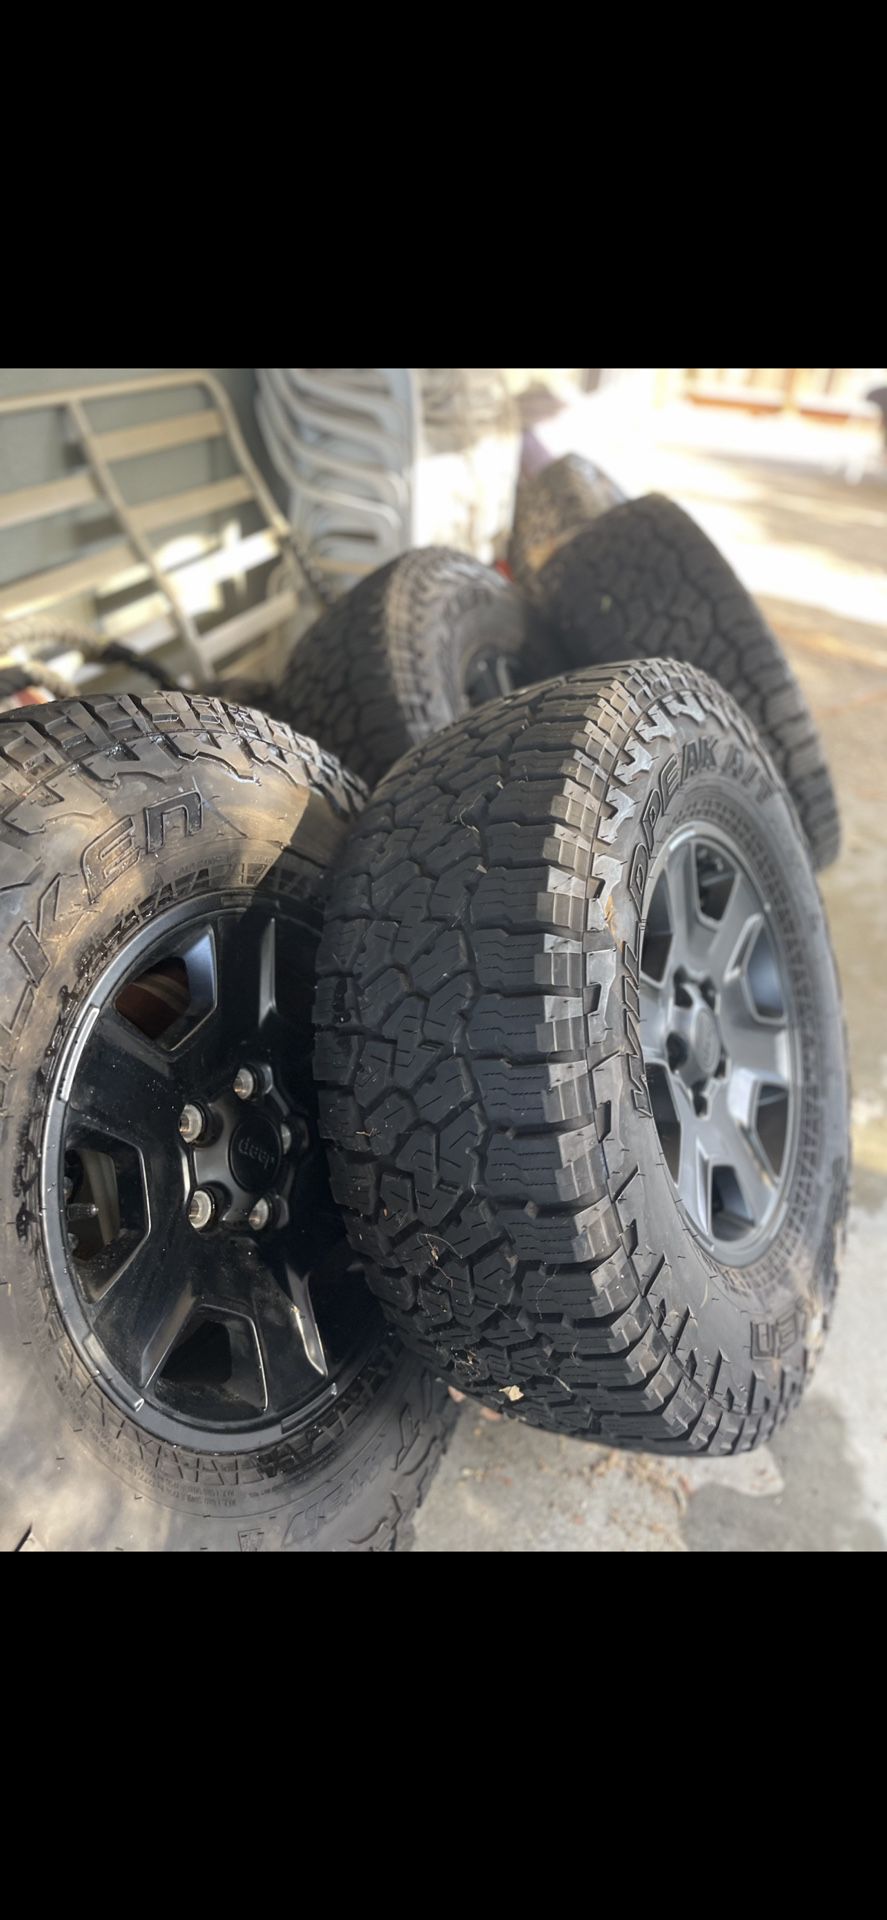 2021 Jeep Mohave Wheels And Suspension 